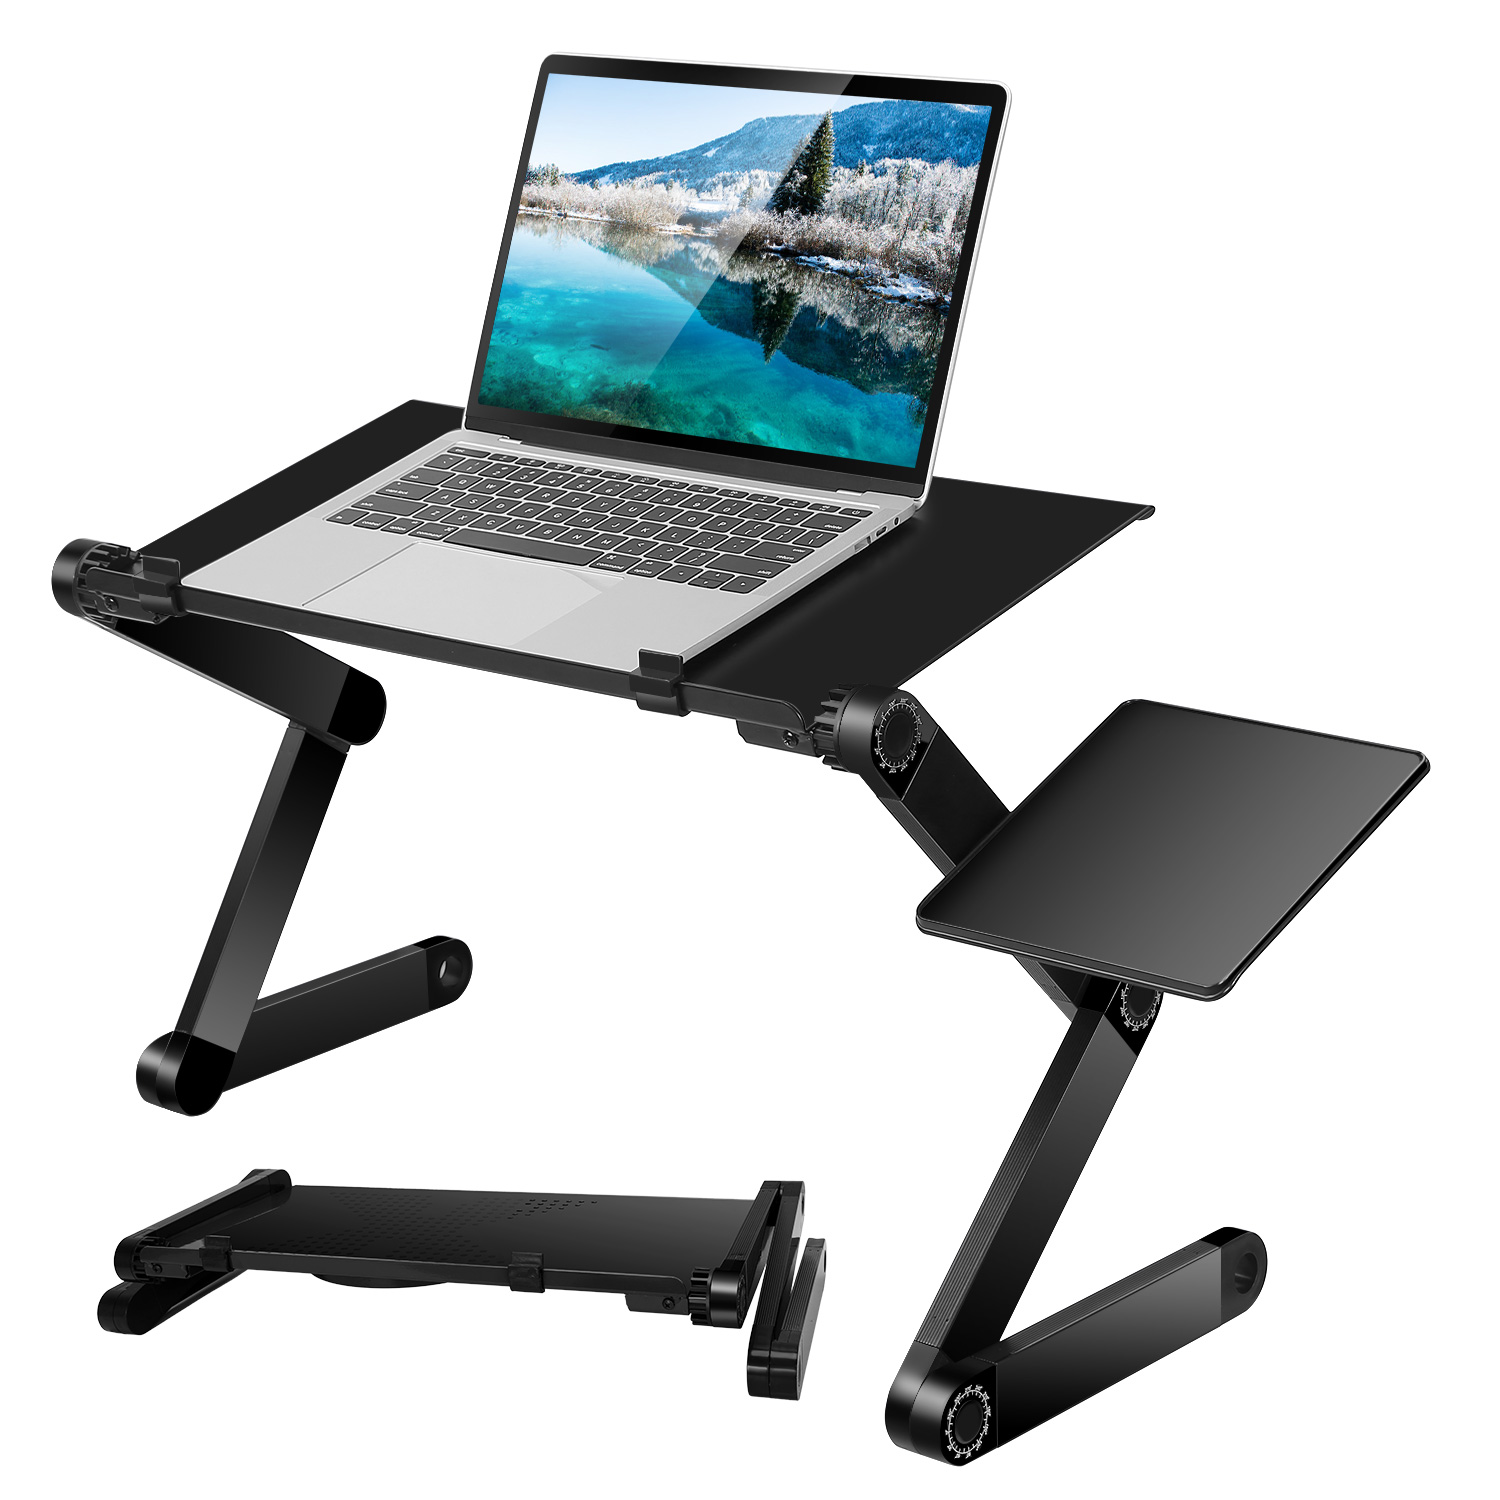 iMounTEK Foldable Laptop Table Bed Notebook Desk with Mouse Board Aluminum Alloy Breakfast Snacking Tray for Home Office Travel Use - image 1 of 11